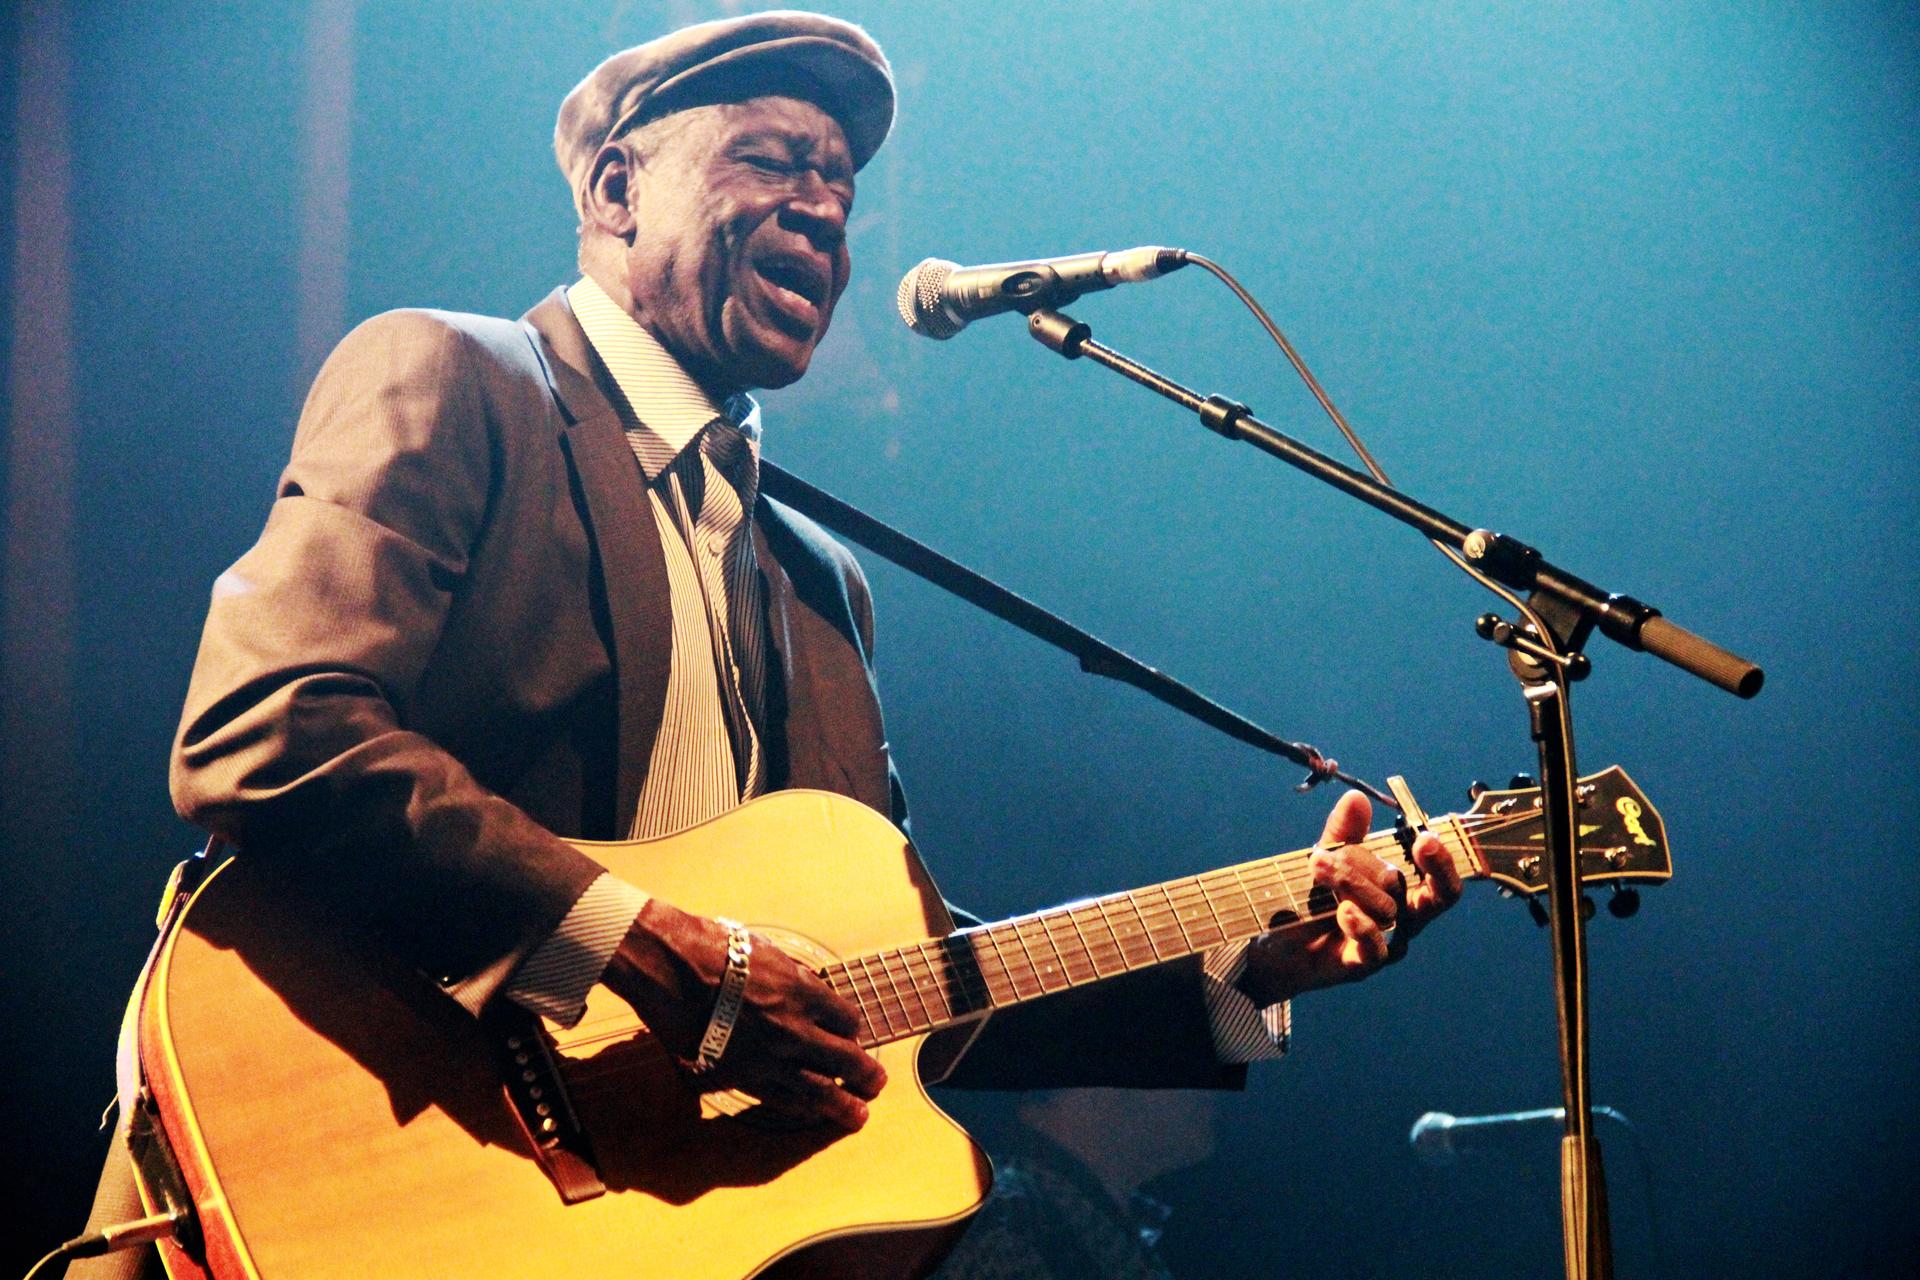 Boubacar Traore on stage. March 29, 2012 Paris,France